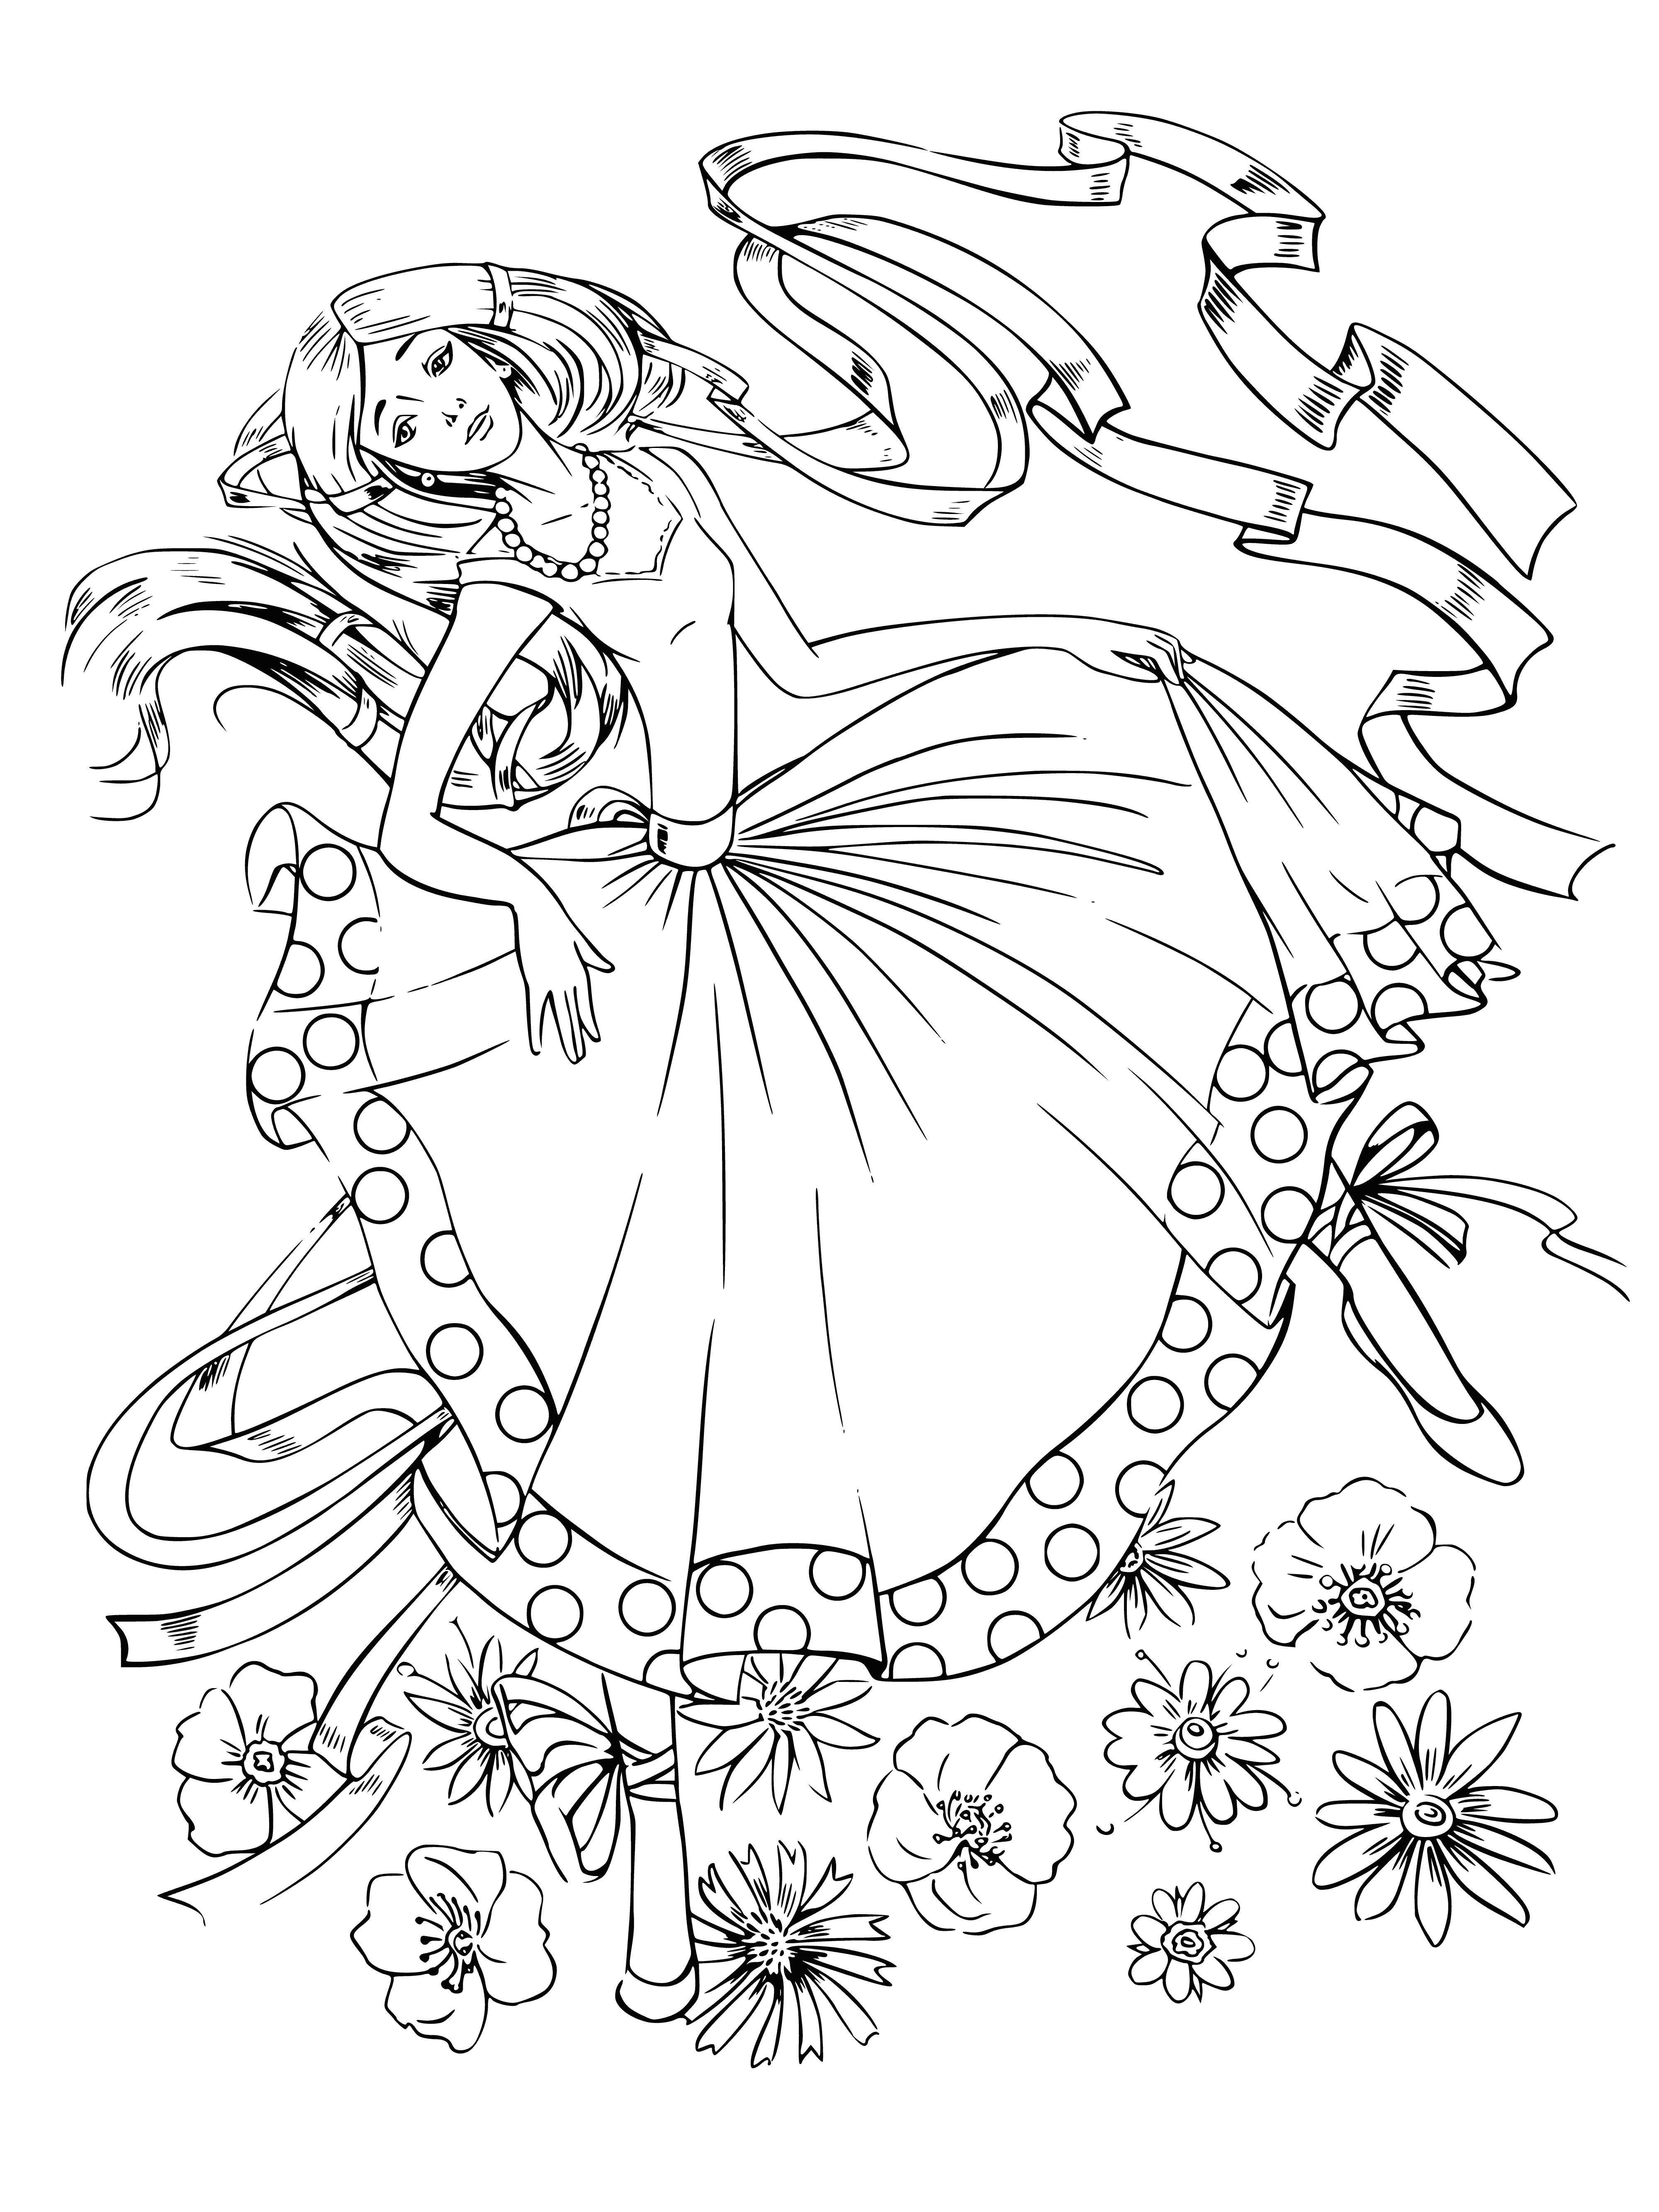 coloring page: Color a ballerina in her tutu! Her hair in a bun, with a floral wreath around her head - perfect for stress-relief and fun.